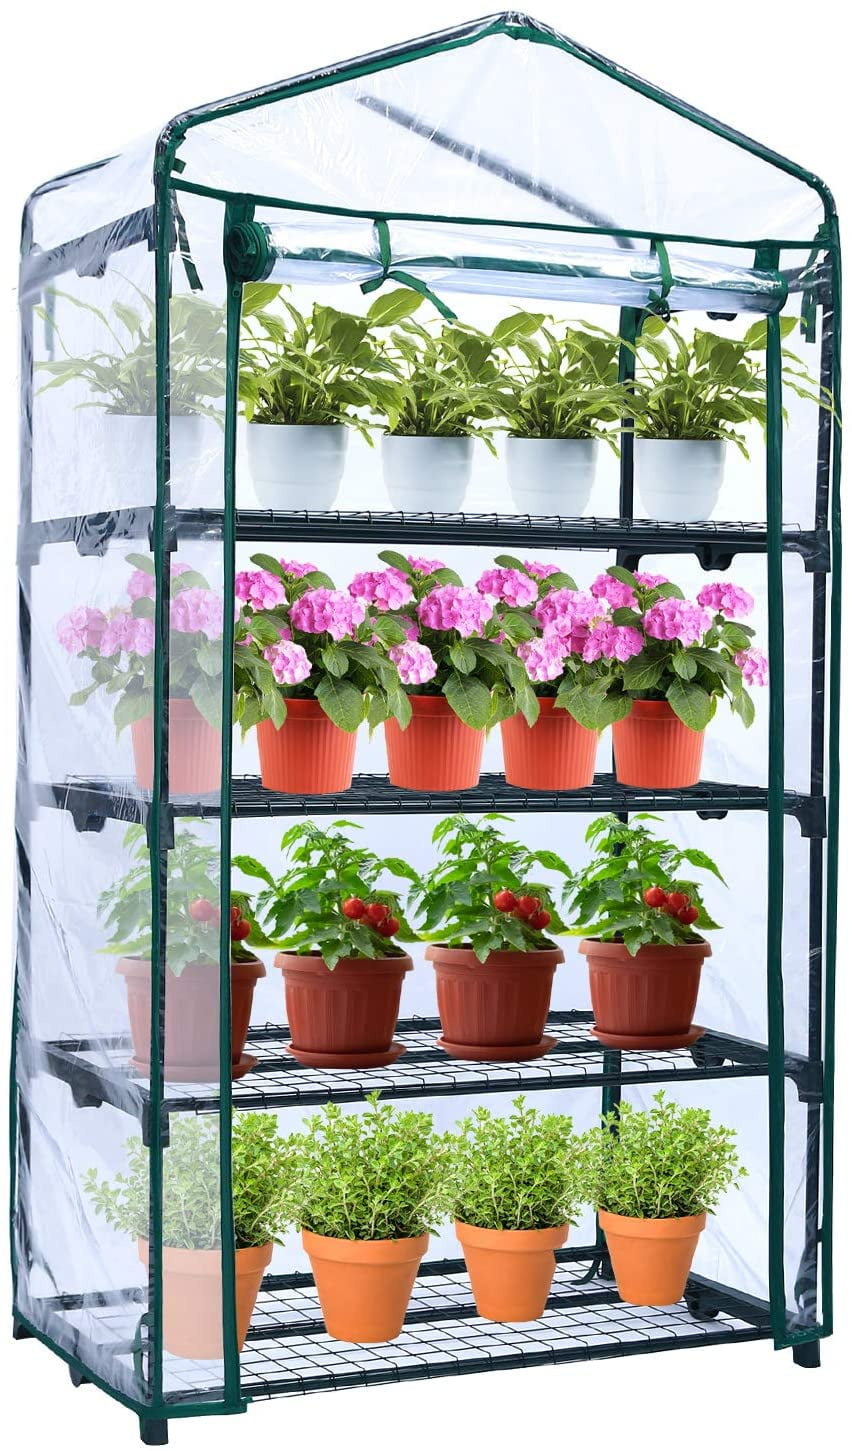 Outdoor Garden Portable PVC Greenhouse w/ Steel Frame for Growing Plants Flowers